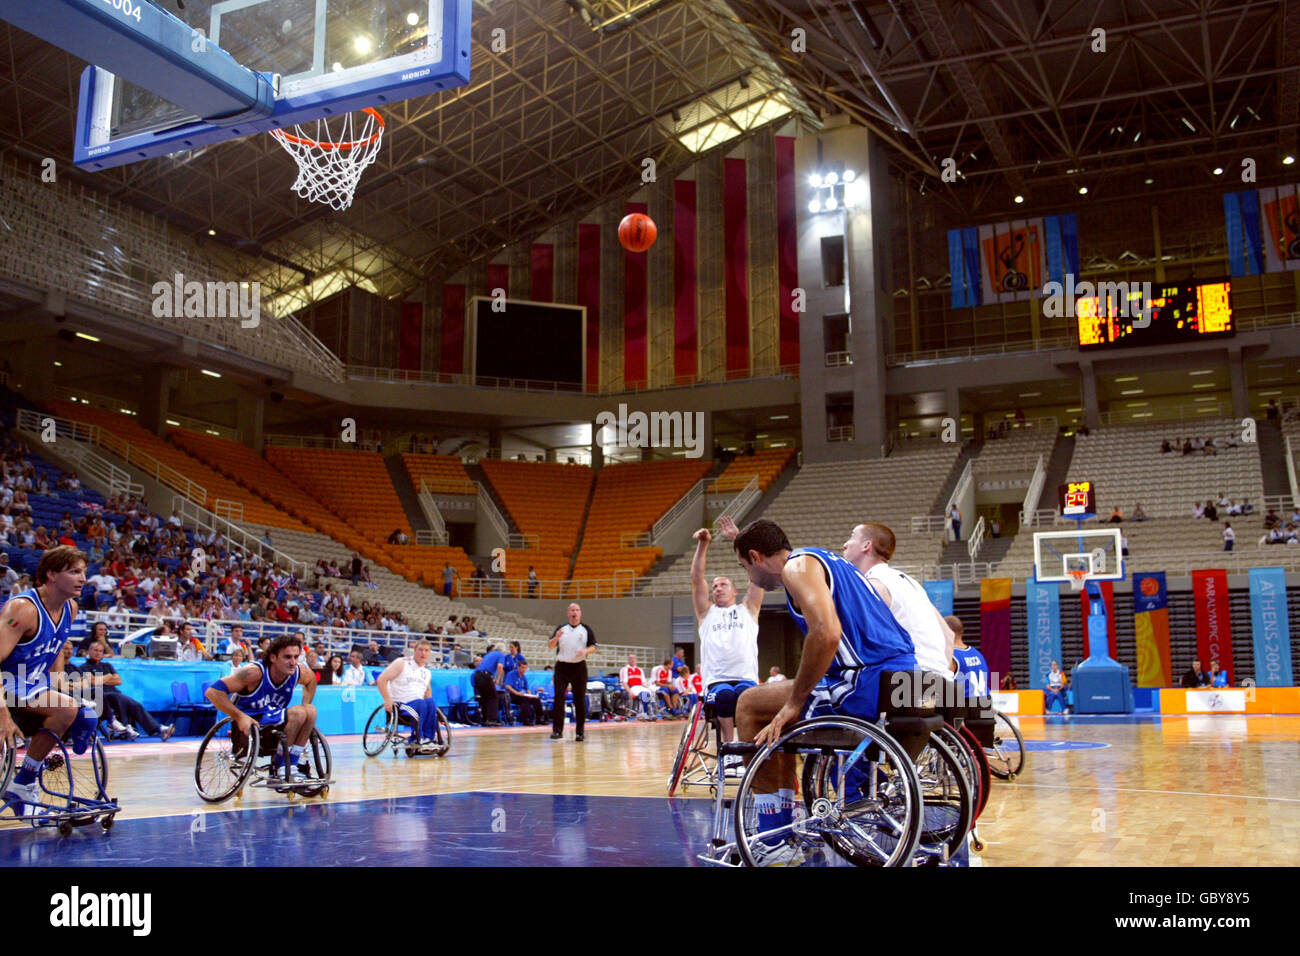 Great Britain's Simon Munn shoots from the free throw line Stock Photo